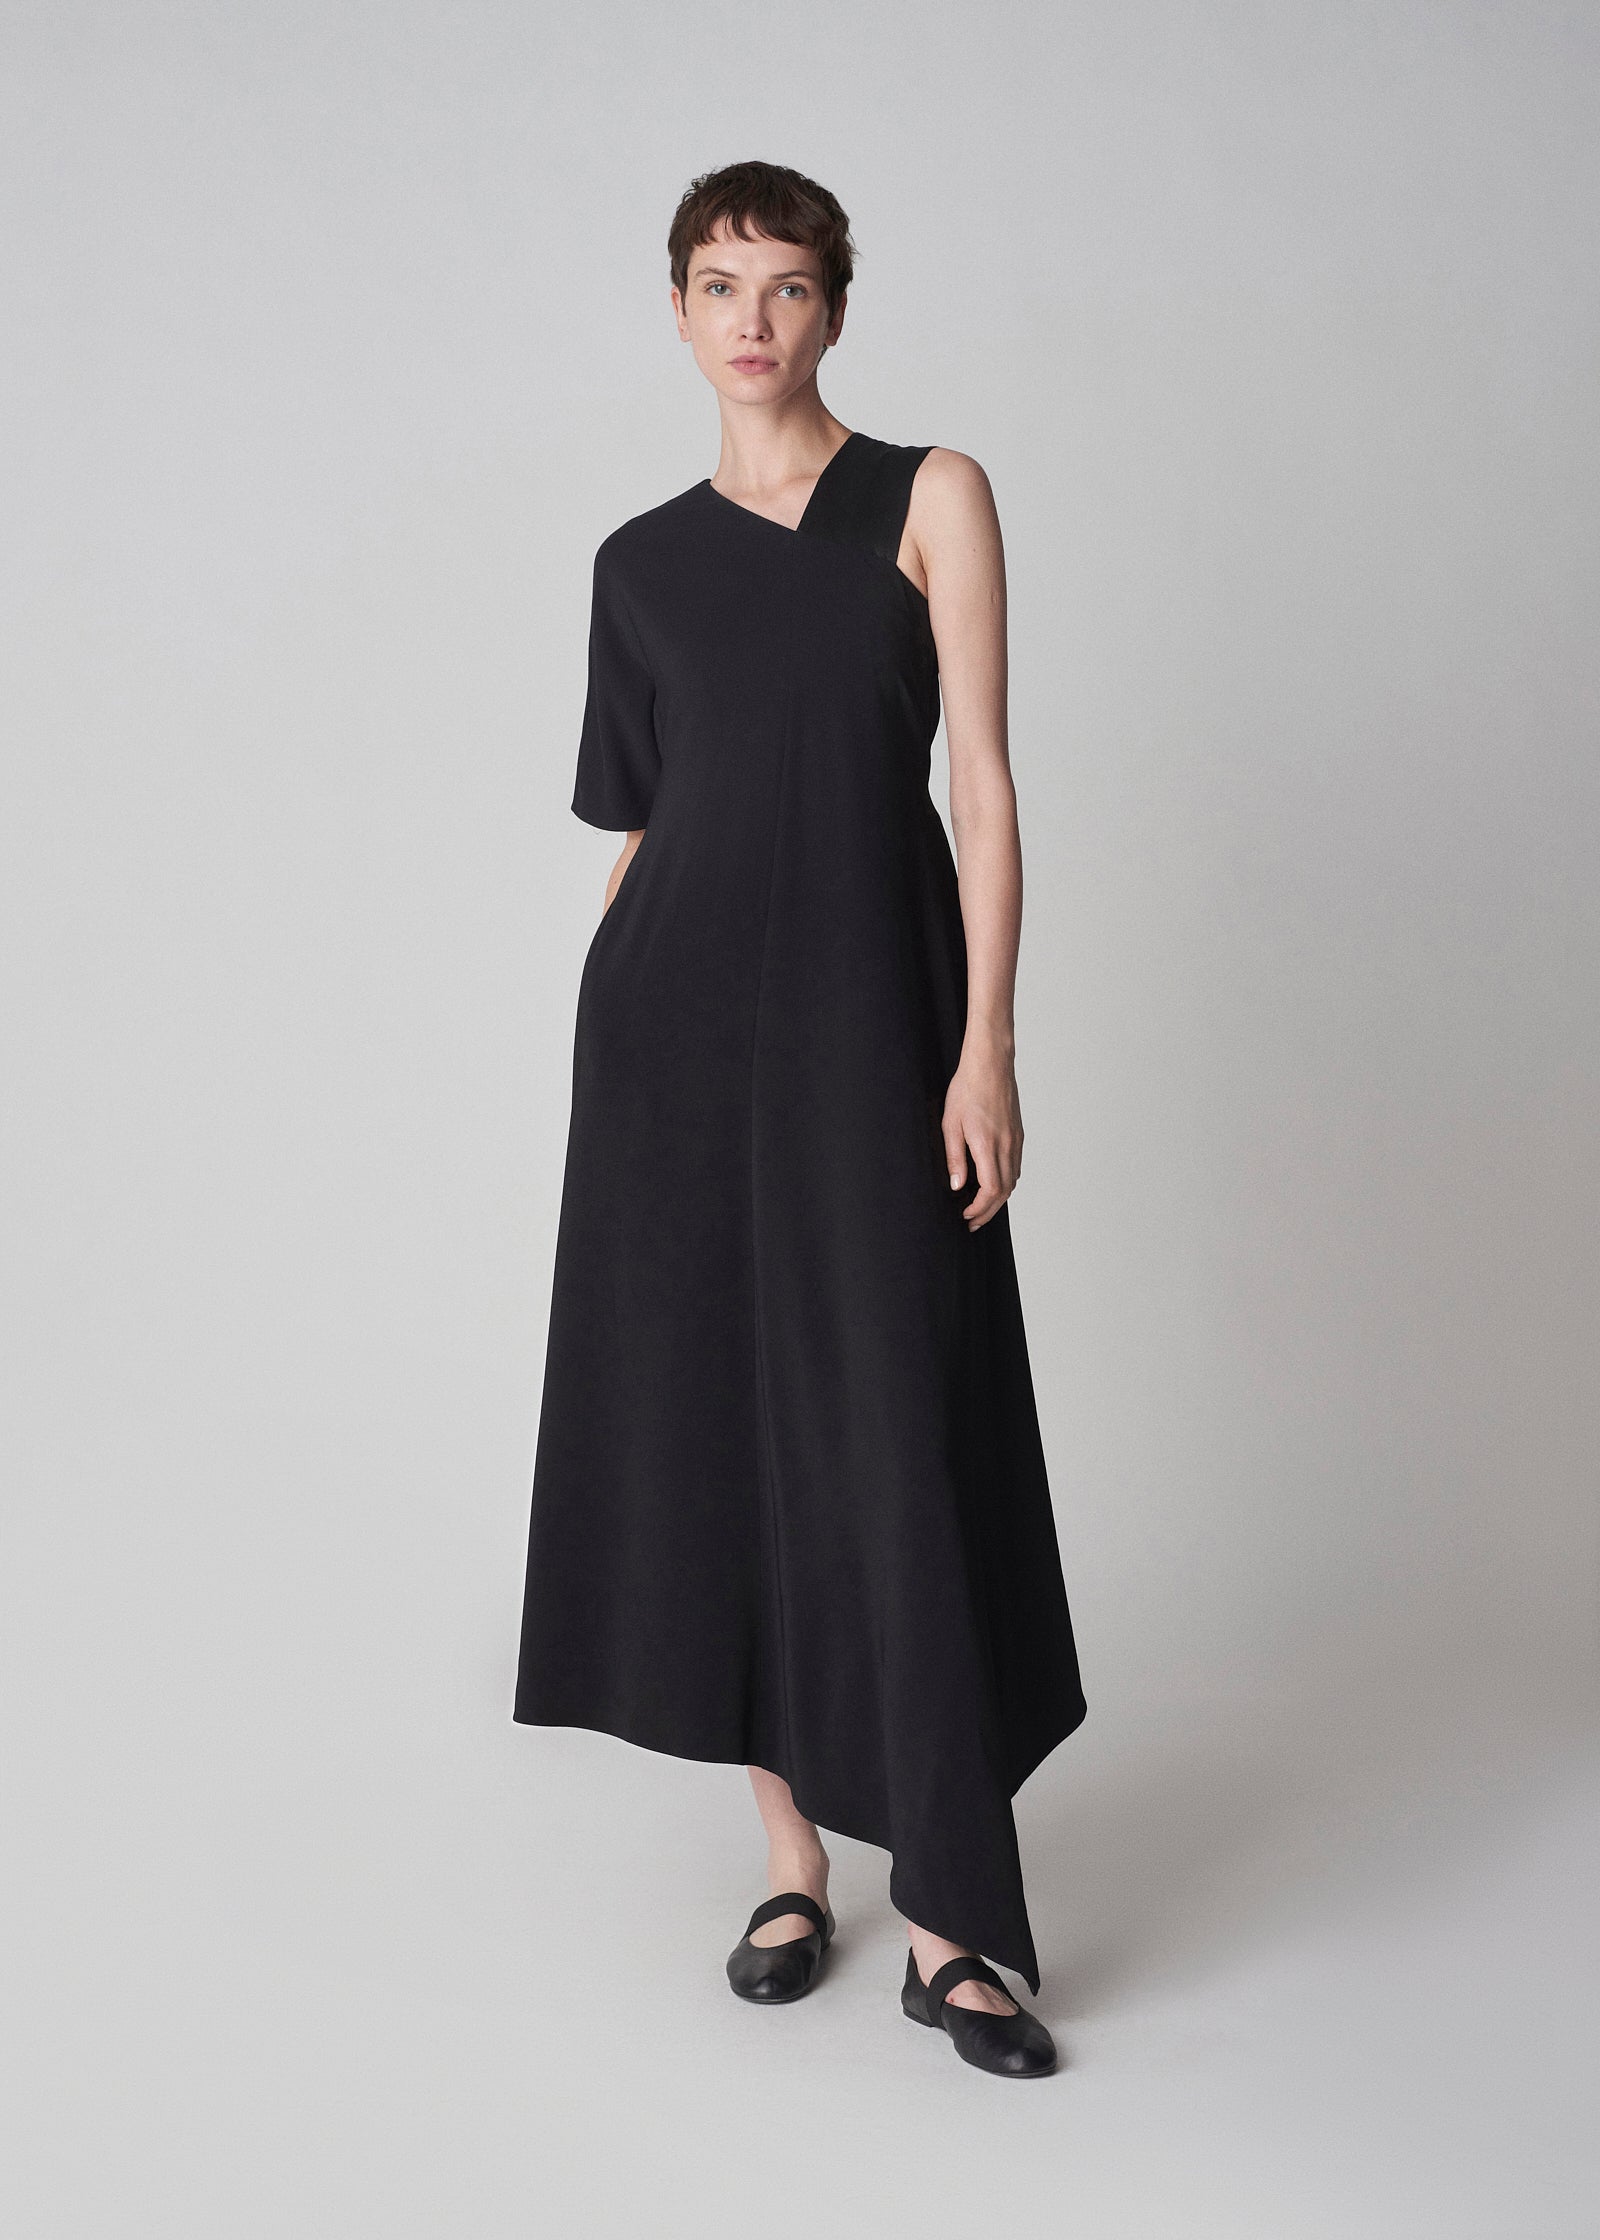 Napkin Dress in Stretch Viscose Crepe - Black - CO Collections